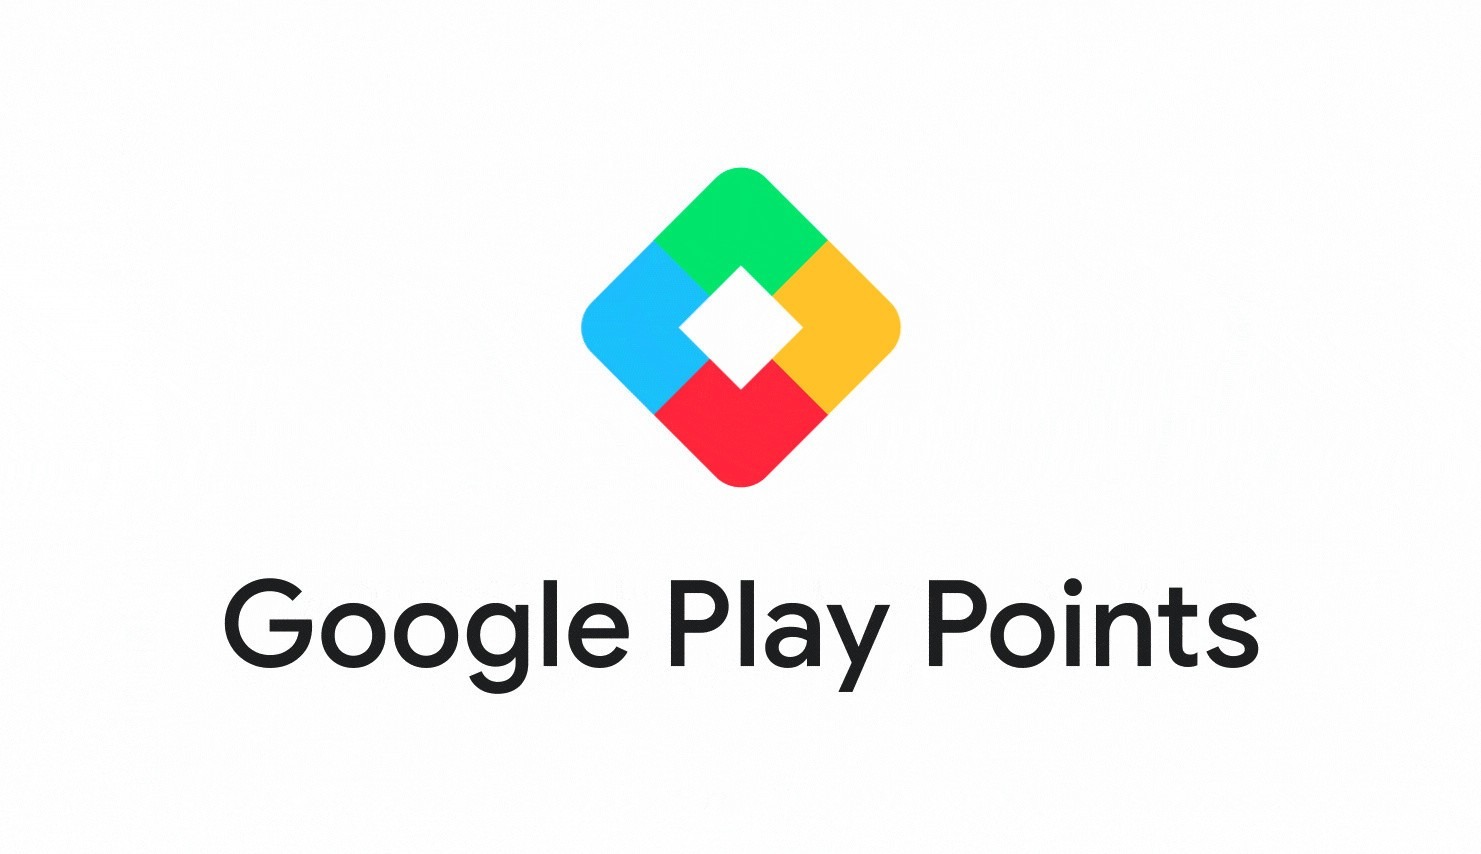 Google Play points are coming to Italy: here’s how it works